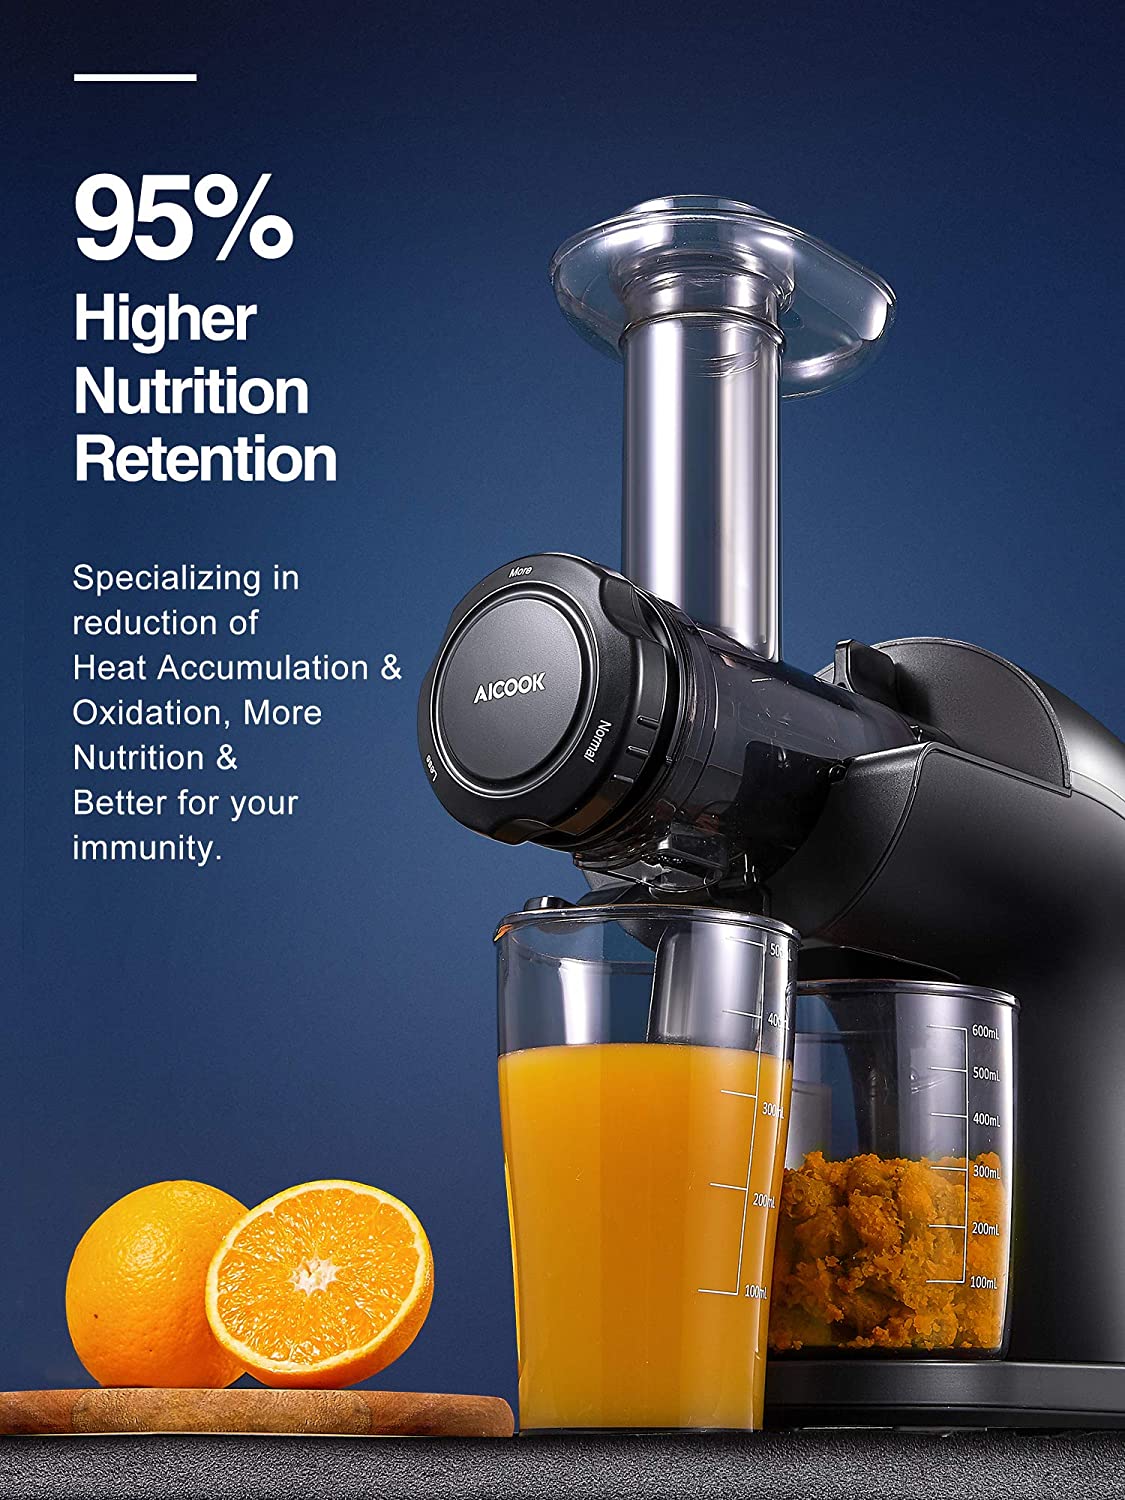 Aicook | High Nutrition Cold Press Juicer, No Filter Design with Less Oxidation, Juice Recipes for Whole Vegetables and Fruits, Multiple Modes for Different Flavors, 95% Higher Nutrition Retention